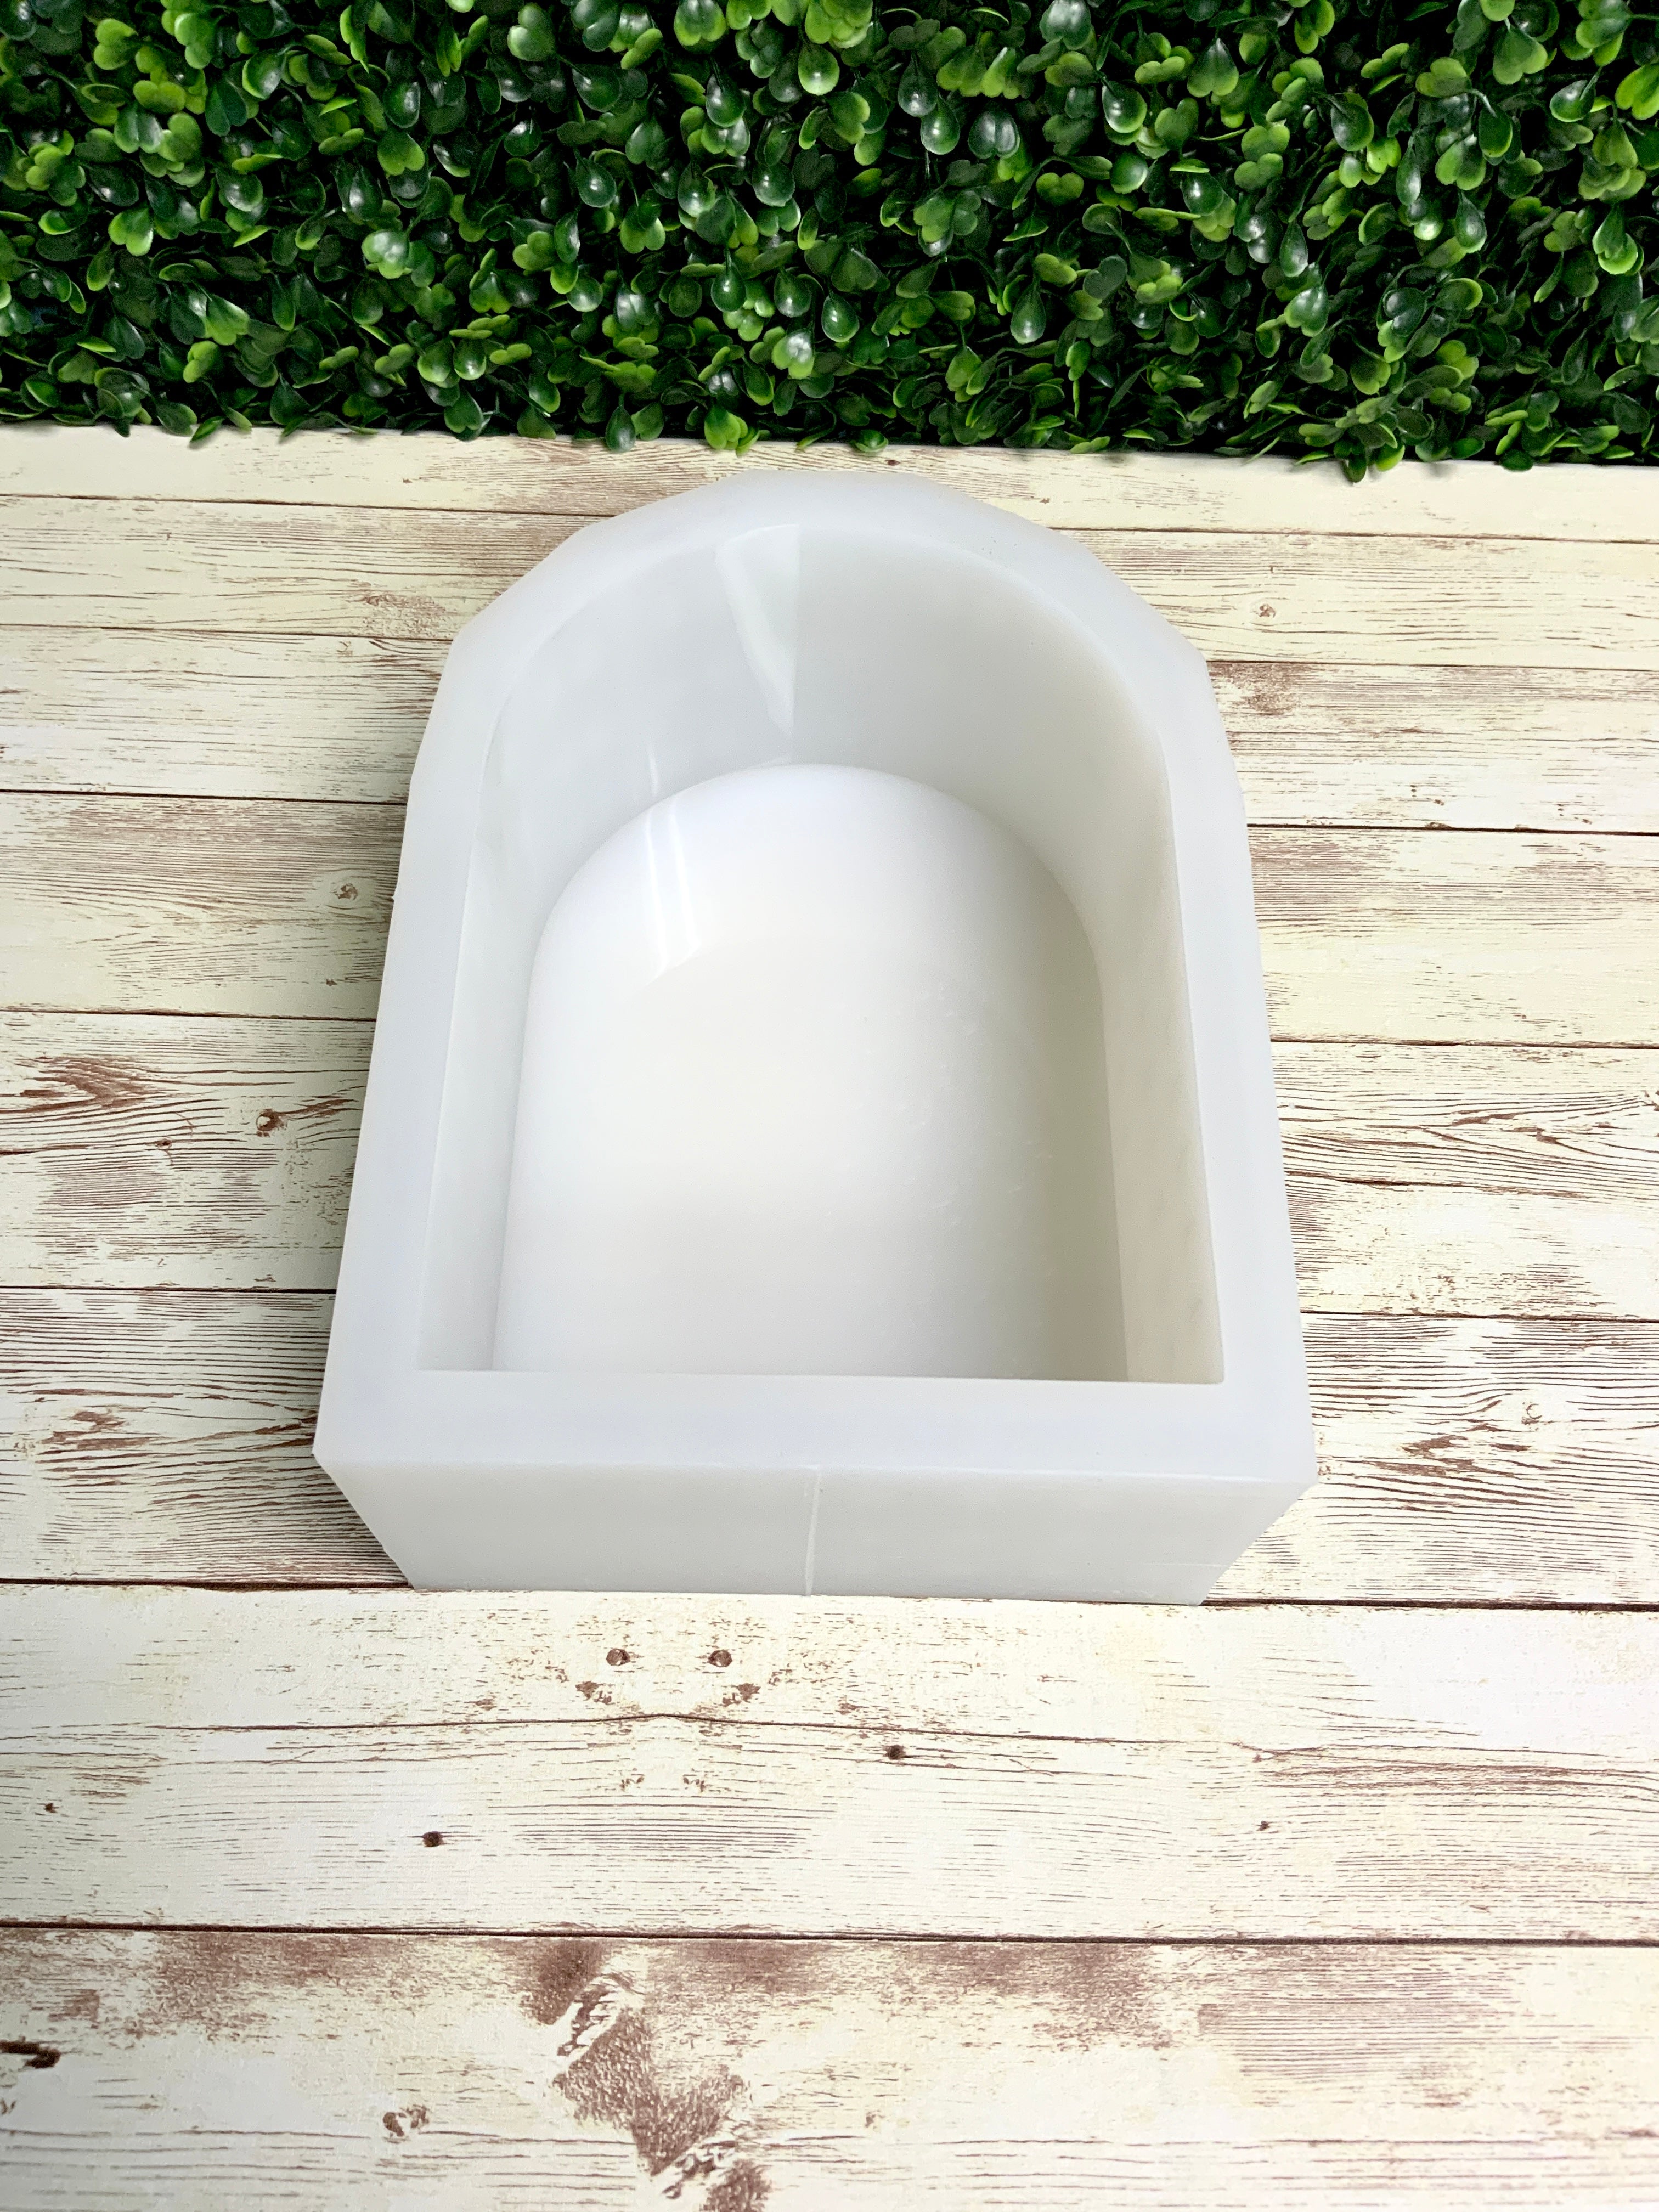 8x6.4x3.1 Small Arch Shaped Silicone Mold For Epoxy Resin - Deep Casting  Mold